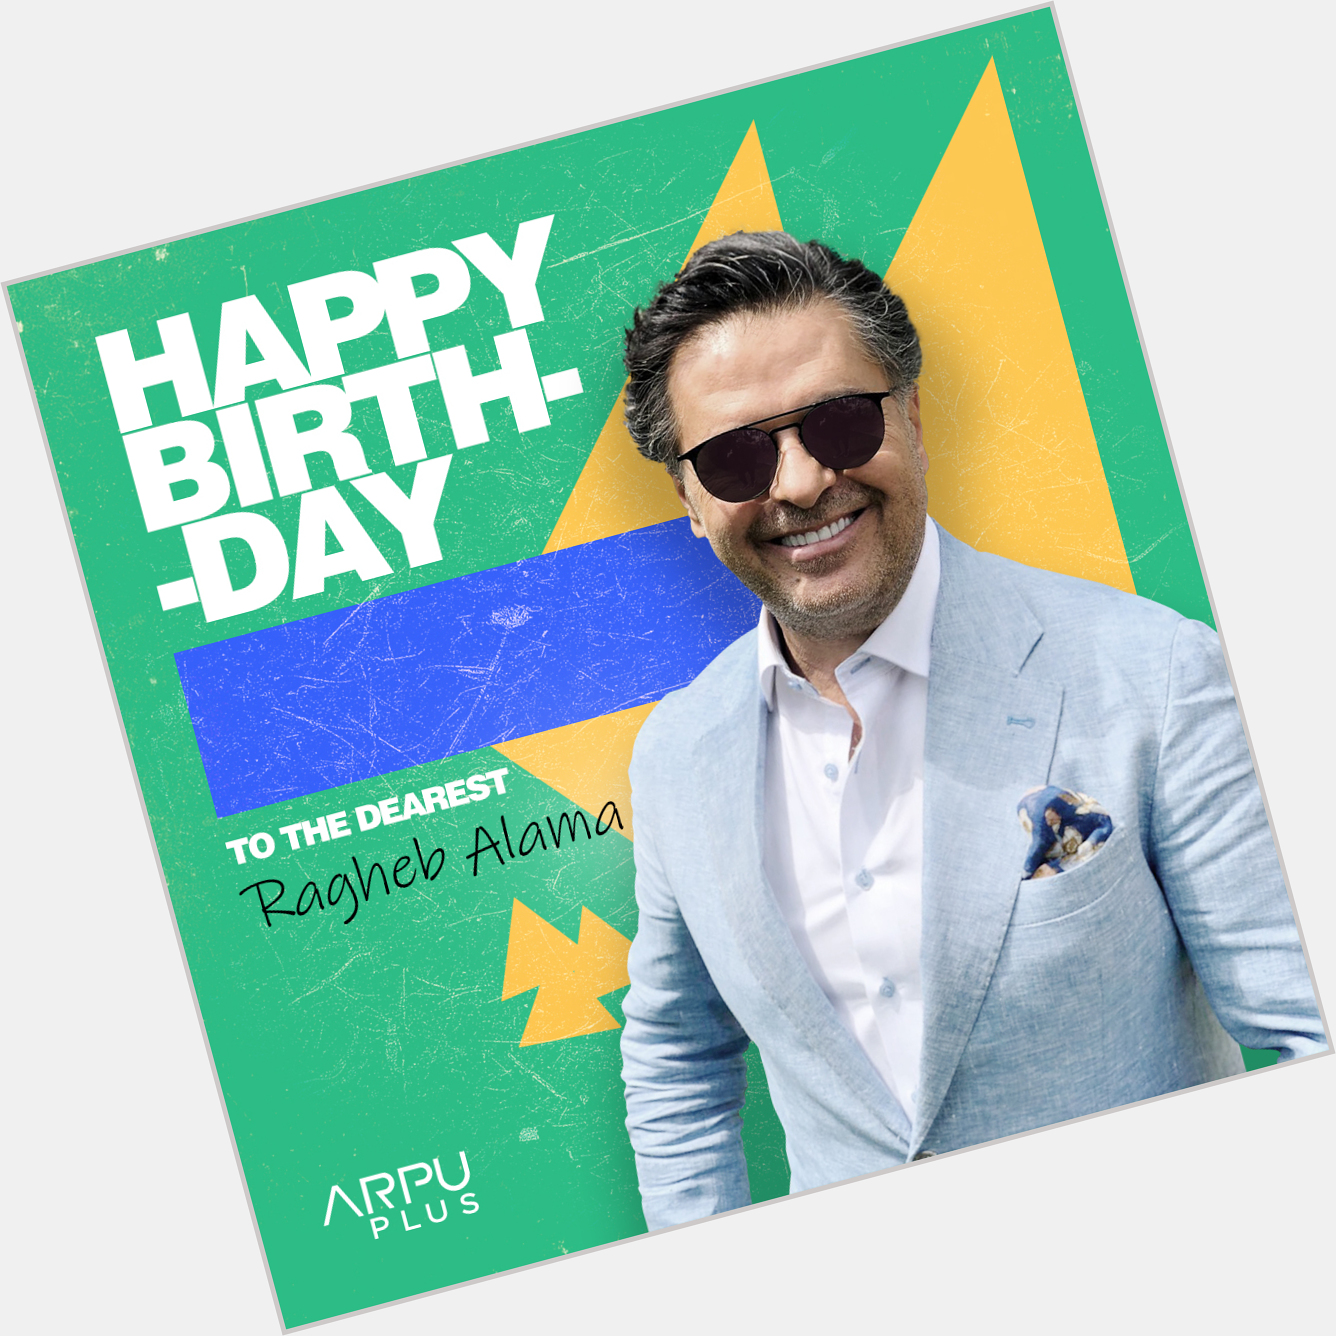 Sending warm wishes to our dearest MEGA Star Ragheb Alama for a very HAPPY BIRTHDAY    